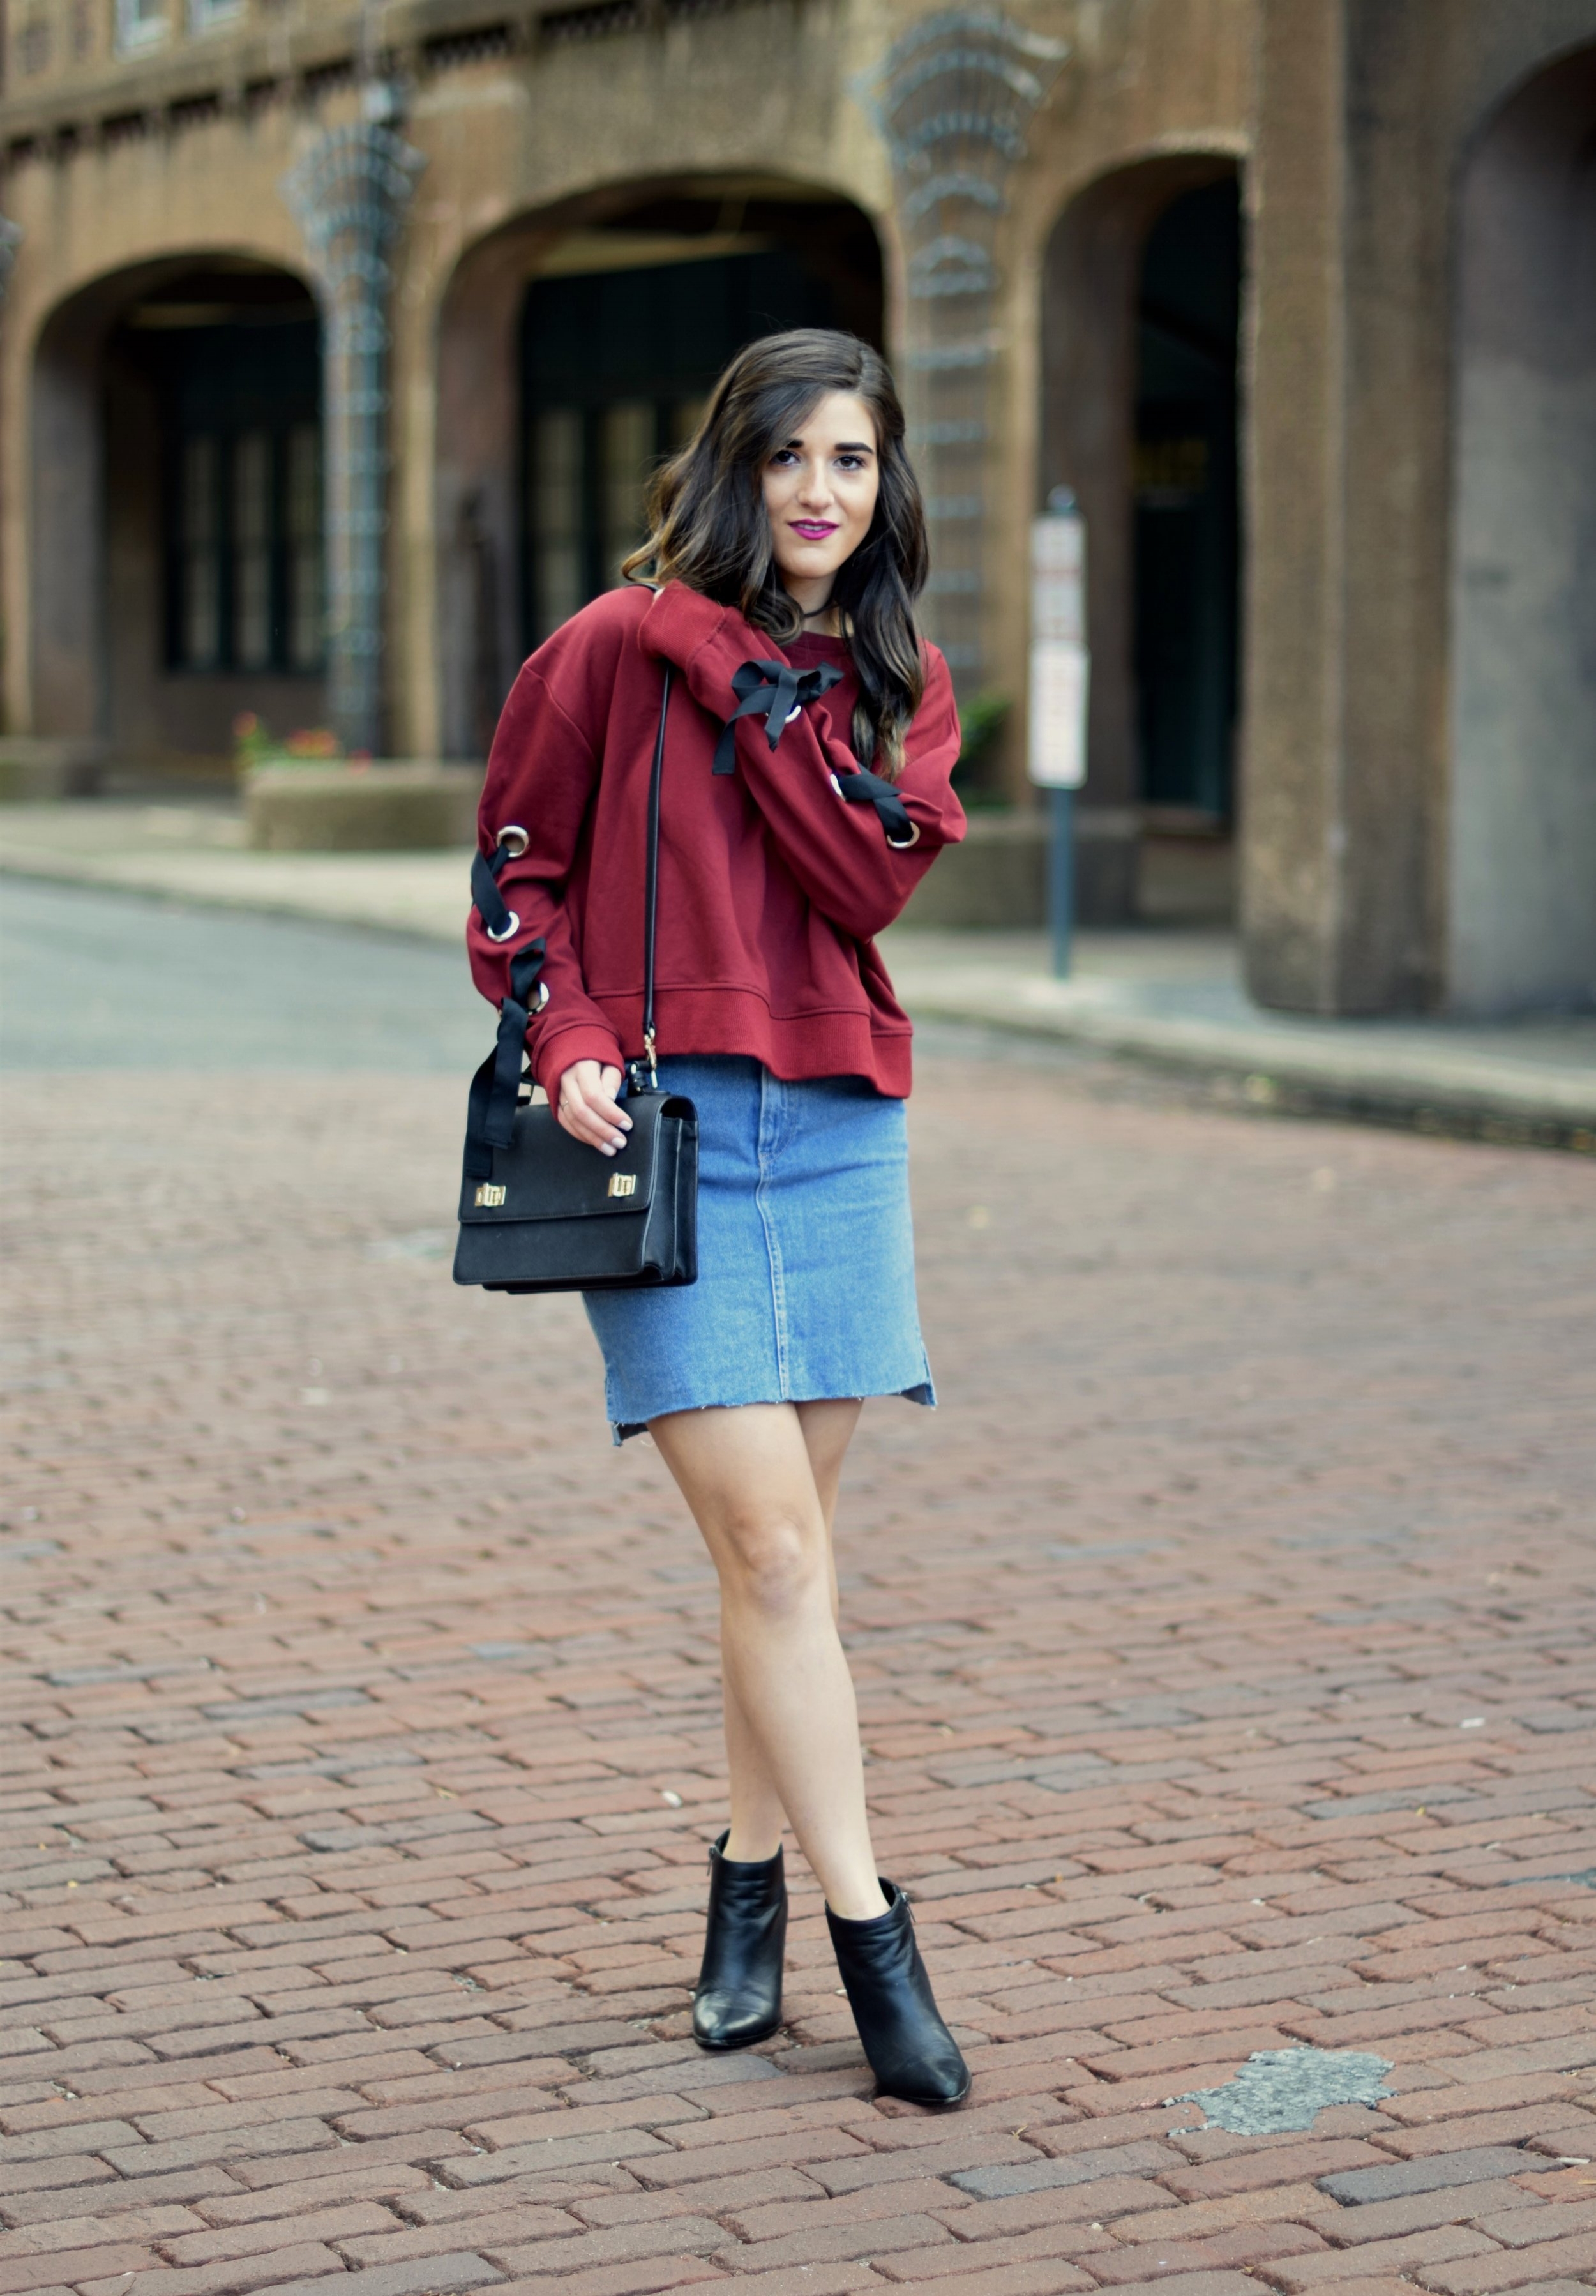 Red Lace-Up Sleeve Sweatshirt + Denim Skirt // 10 Things I'm Thankful For  This Year — Esther Santer